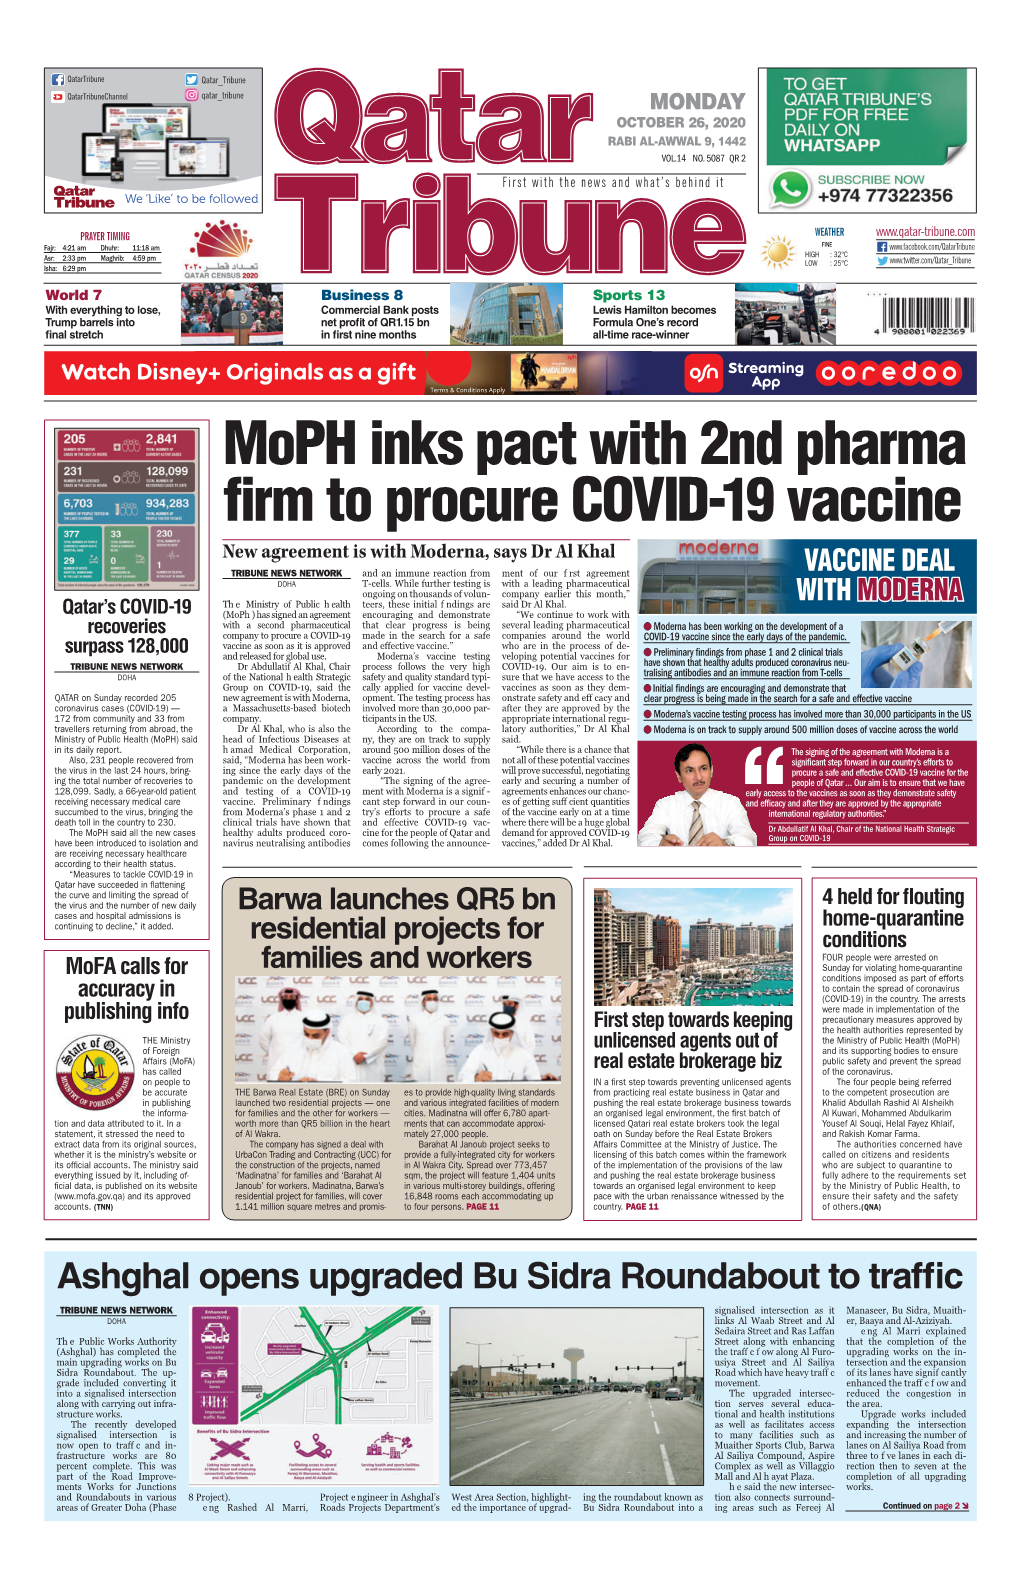 Moph Inks Pact with 2Nd Pharma Firm to Procure COVID-19 Vaccine